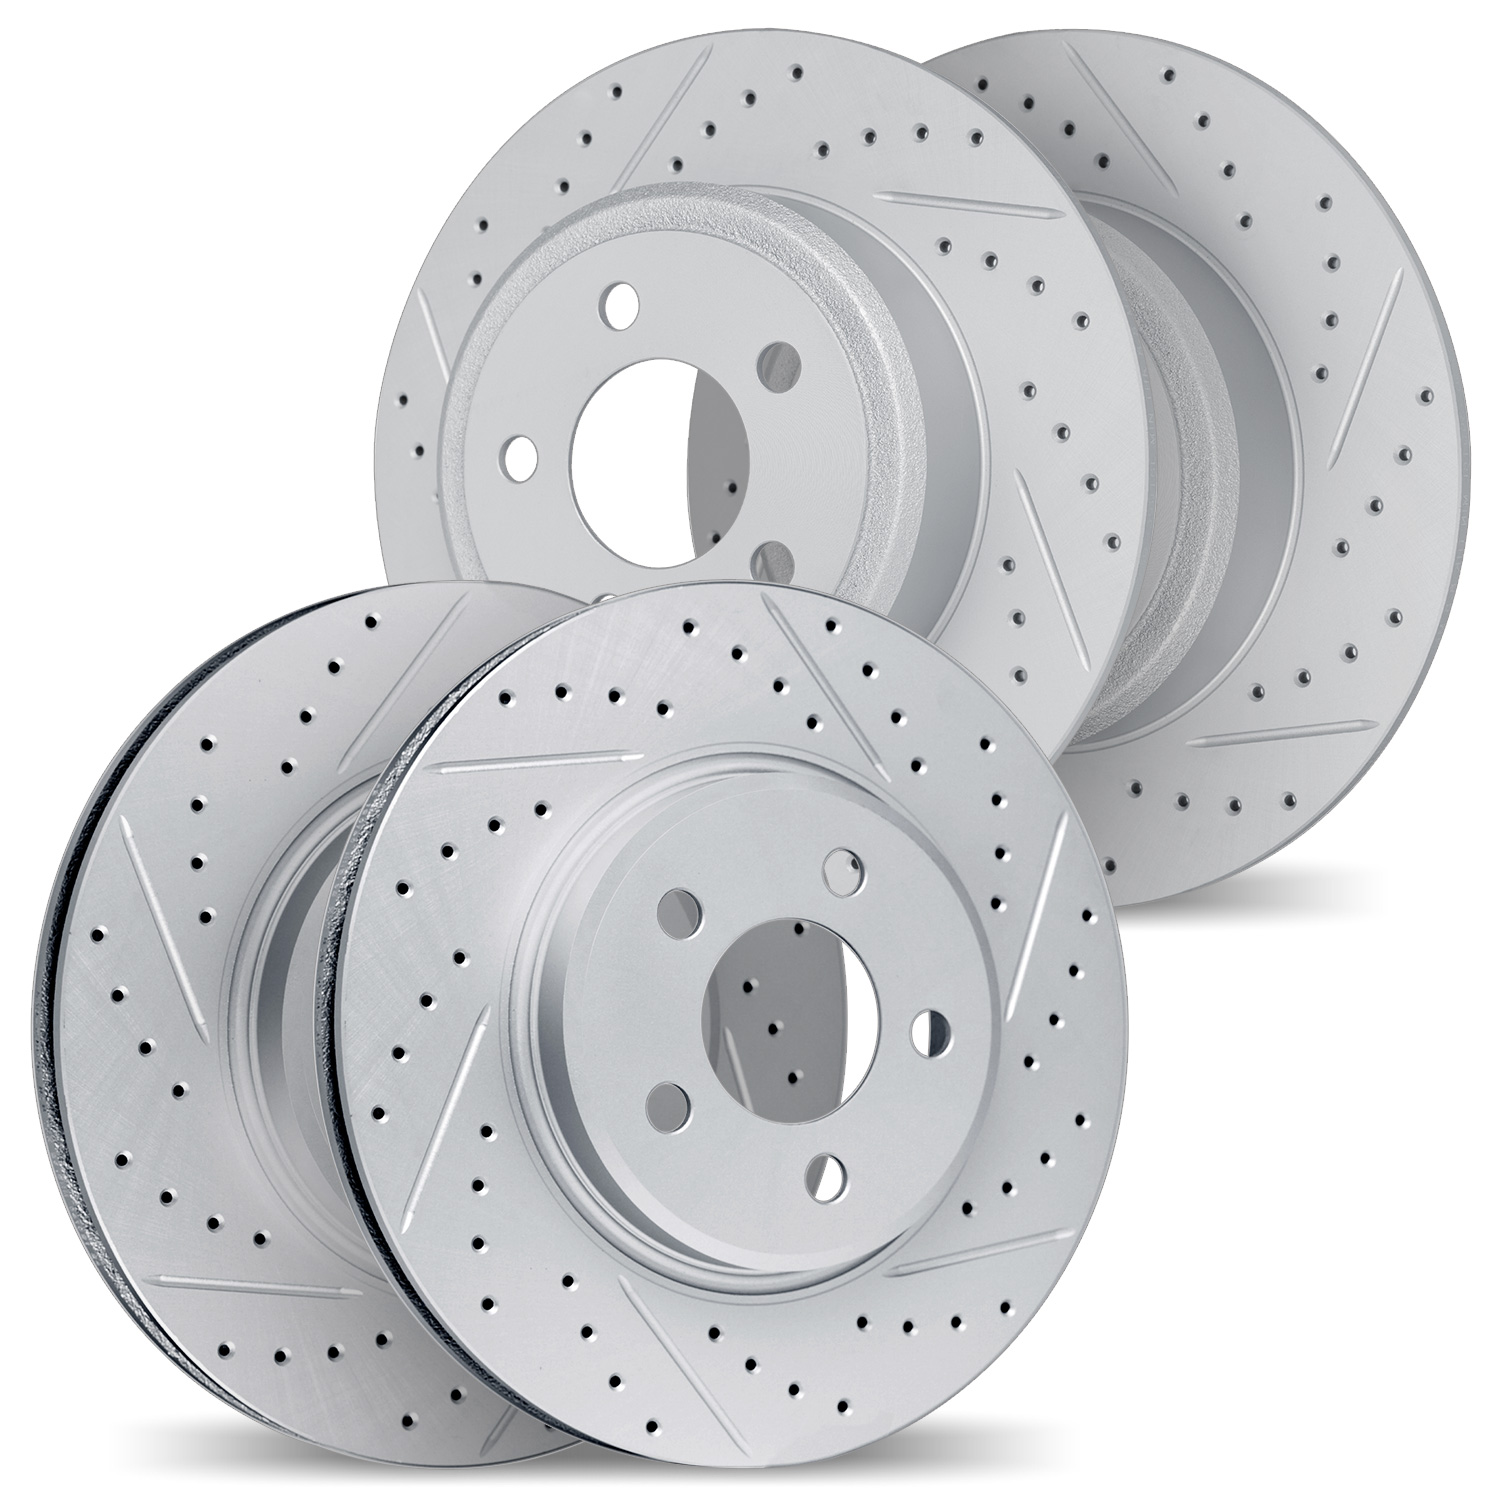 2004-54131 Geoperformance Drilled/Slotted Brake Rotors, 2005-2009 Ford/Lincoln/Mercury/Mazda, Position: Front and Rear